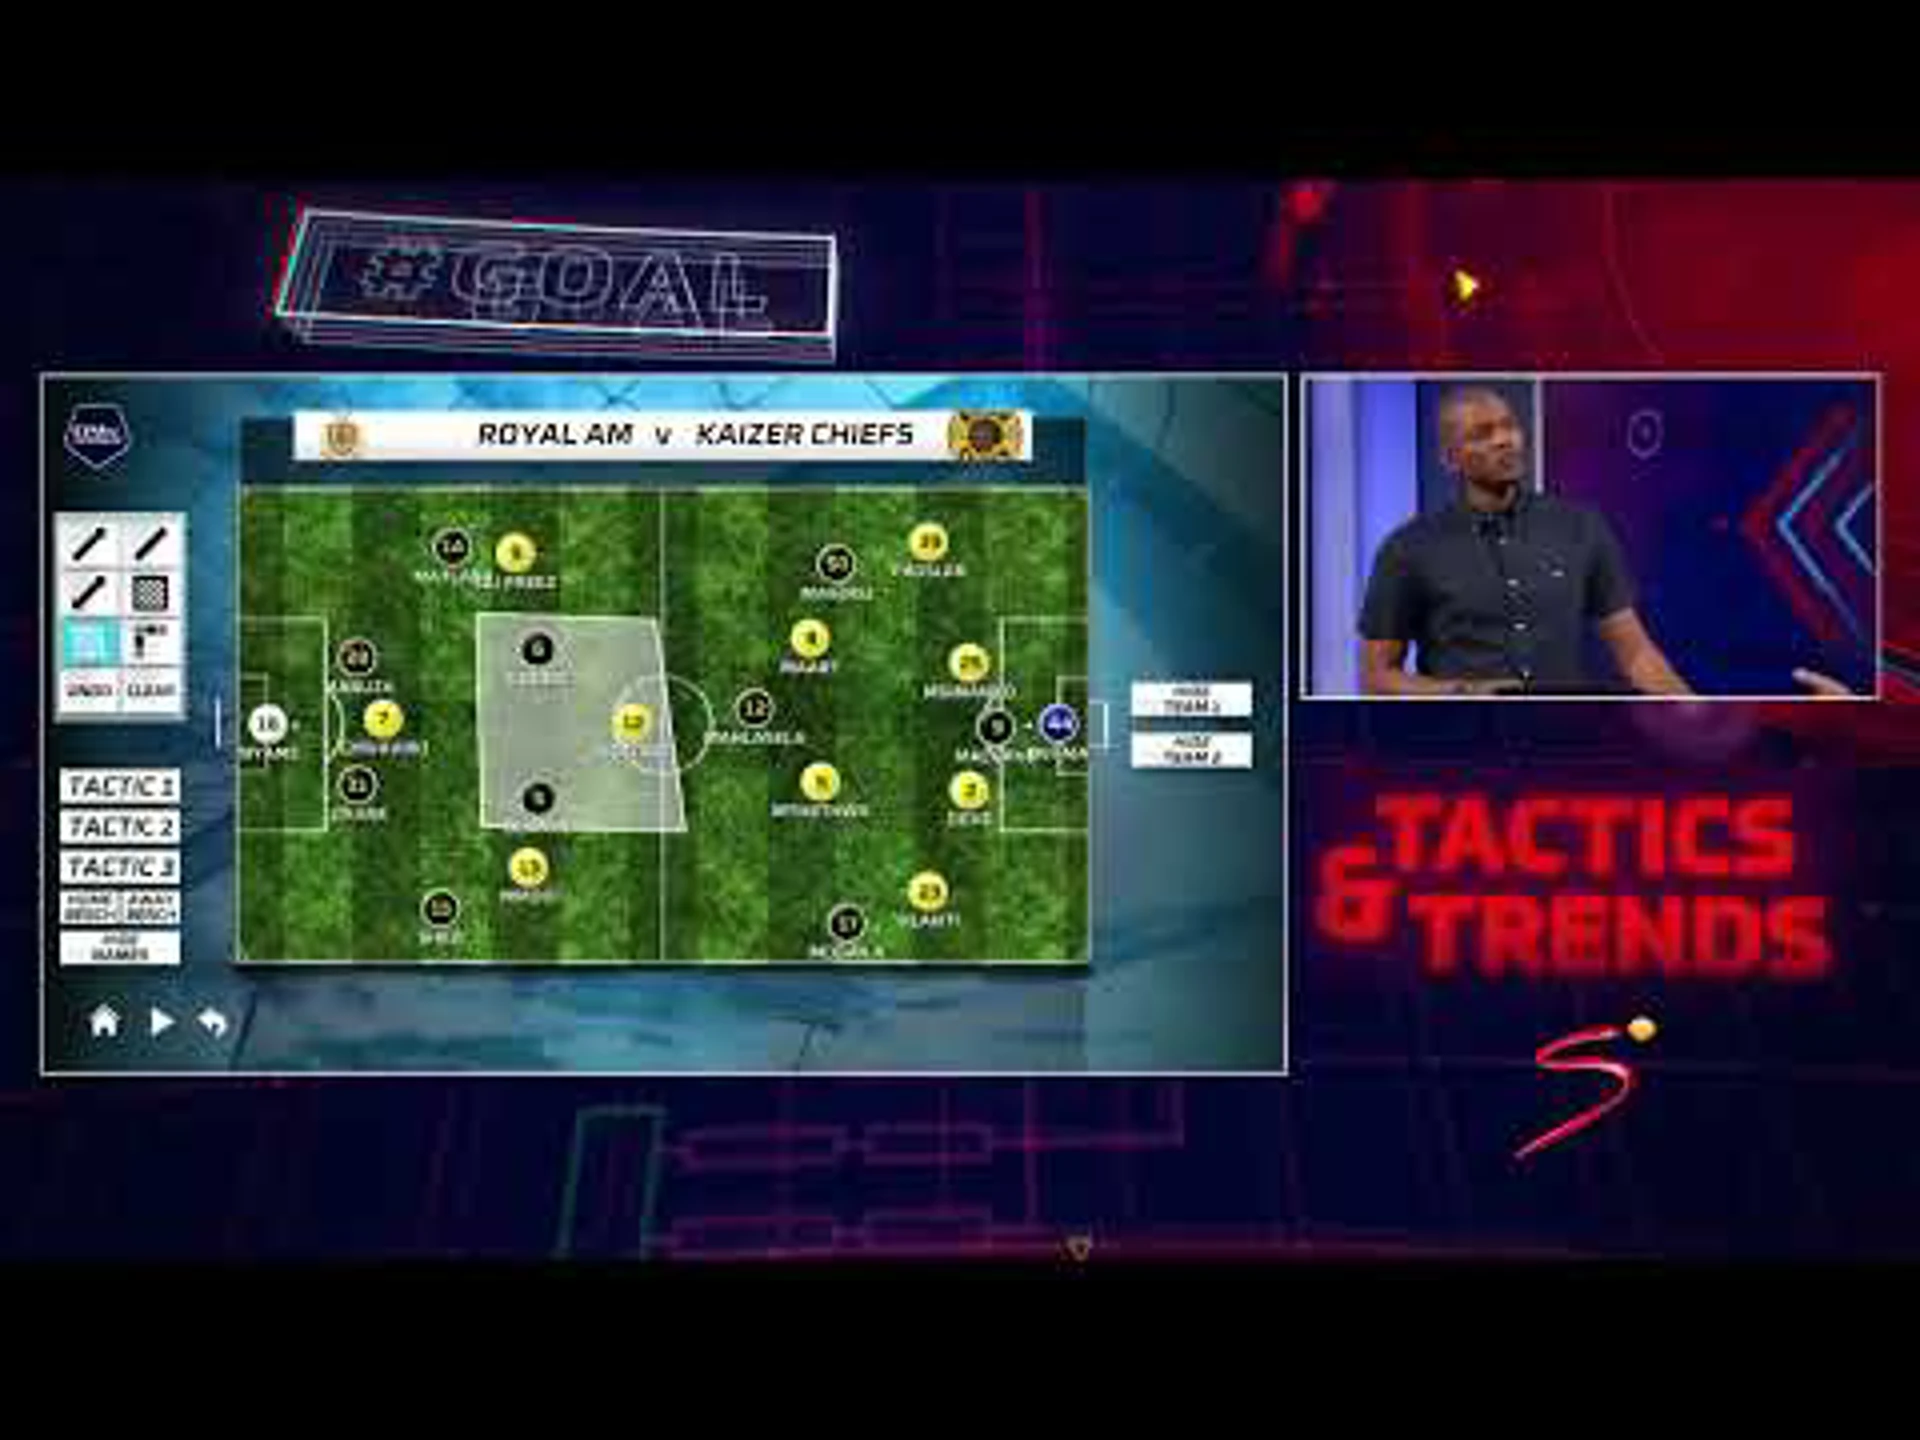 Royal AM v Kaizer Chiefs Possible Formation | Tactics and Trends